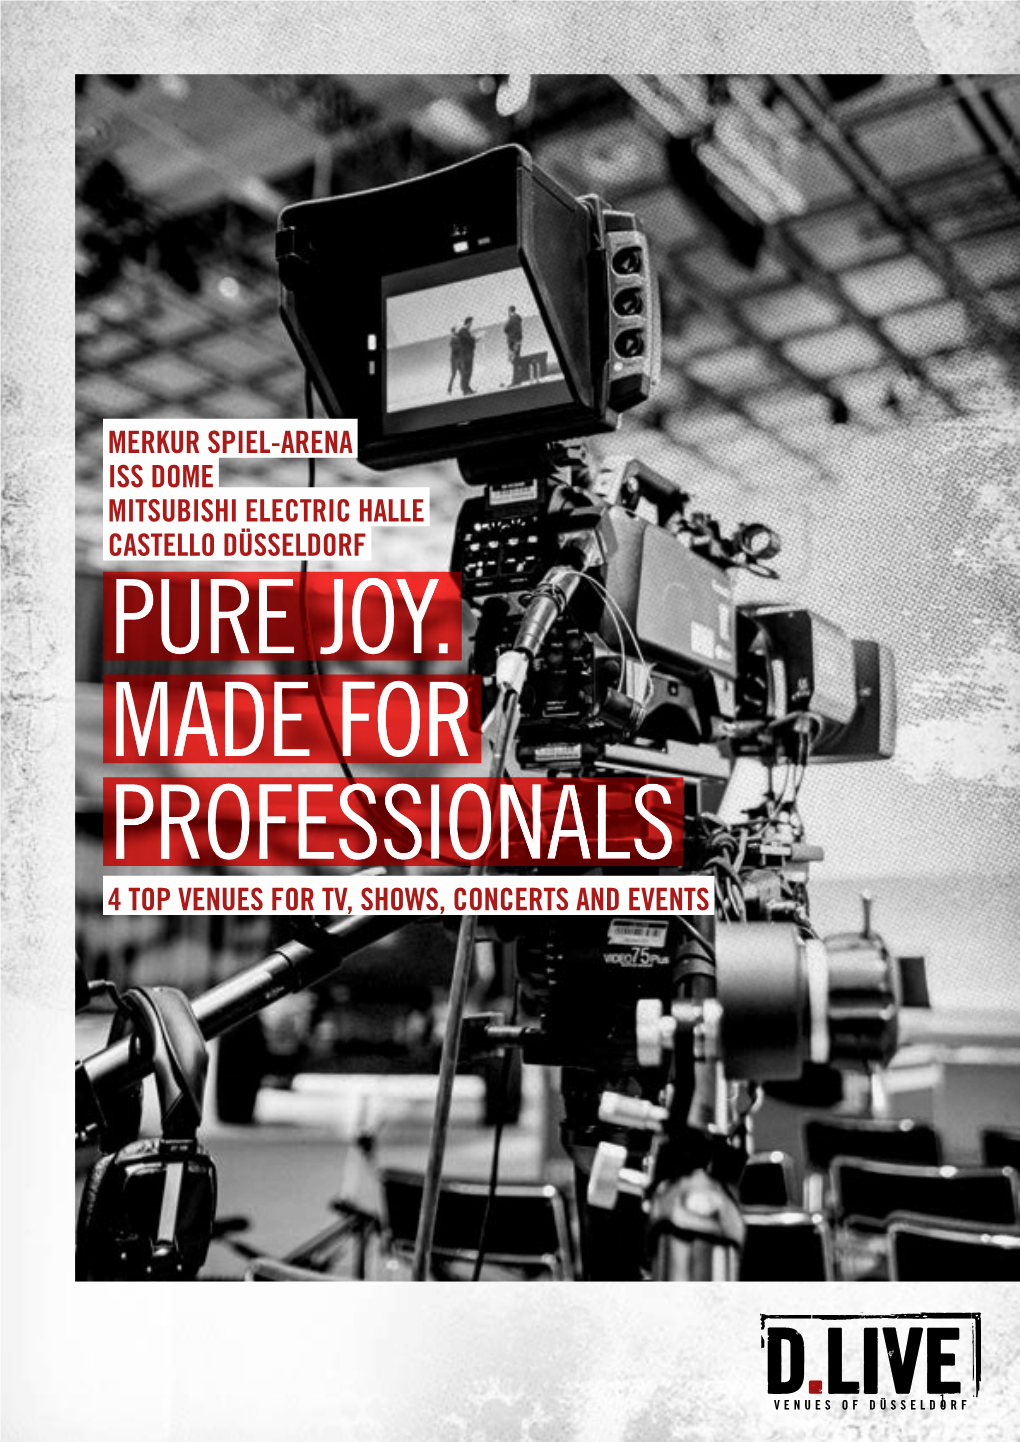 Pure Joy. Made for Professionals 4 Top Venues for Tv, Shows, Concerts and Events